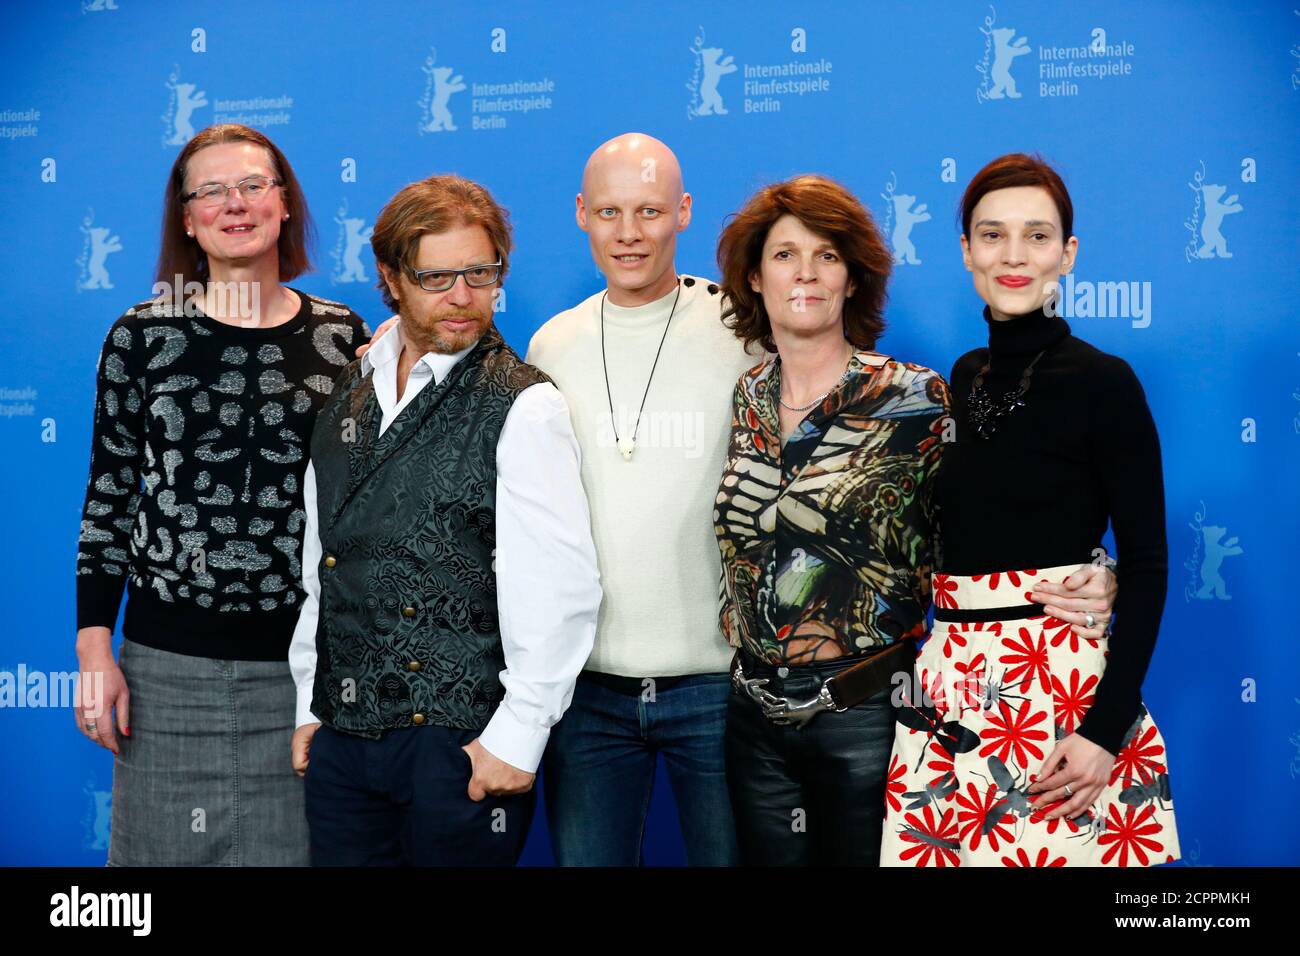 Actors Laura Benson, Hanna Hofmann, Irmena Chichikova, Tomas Lemarquis and Seani  Love pose during a photocall to promote the movie Touch Me Not at the 68th  Berlinale International Film Festival in Berlin,